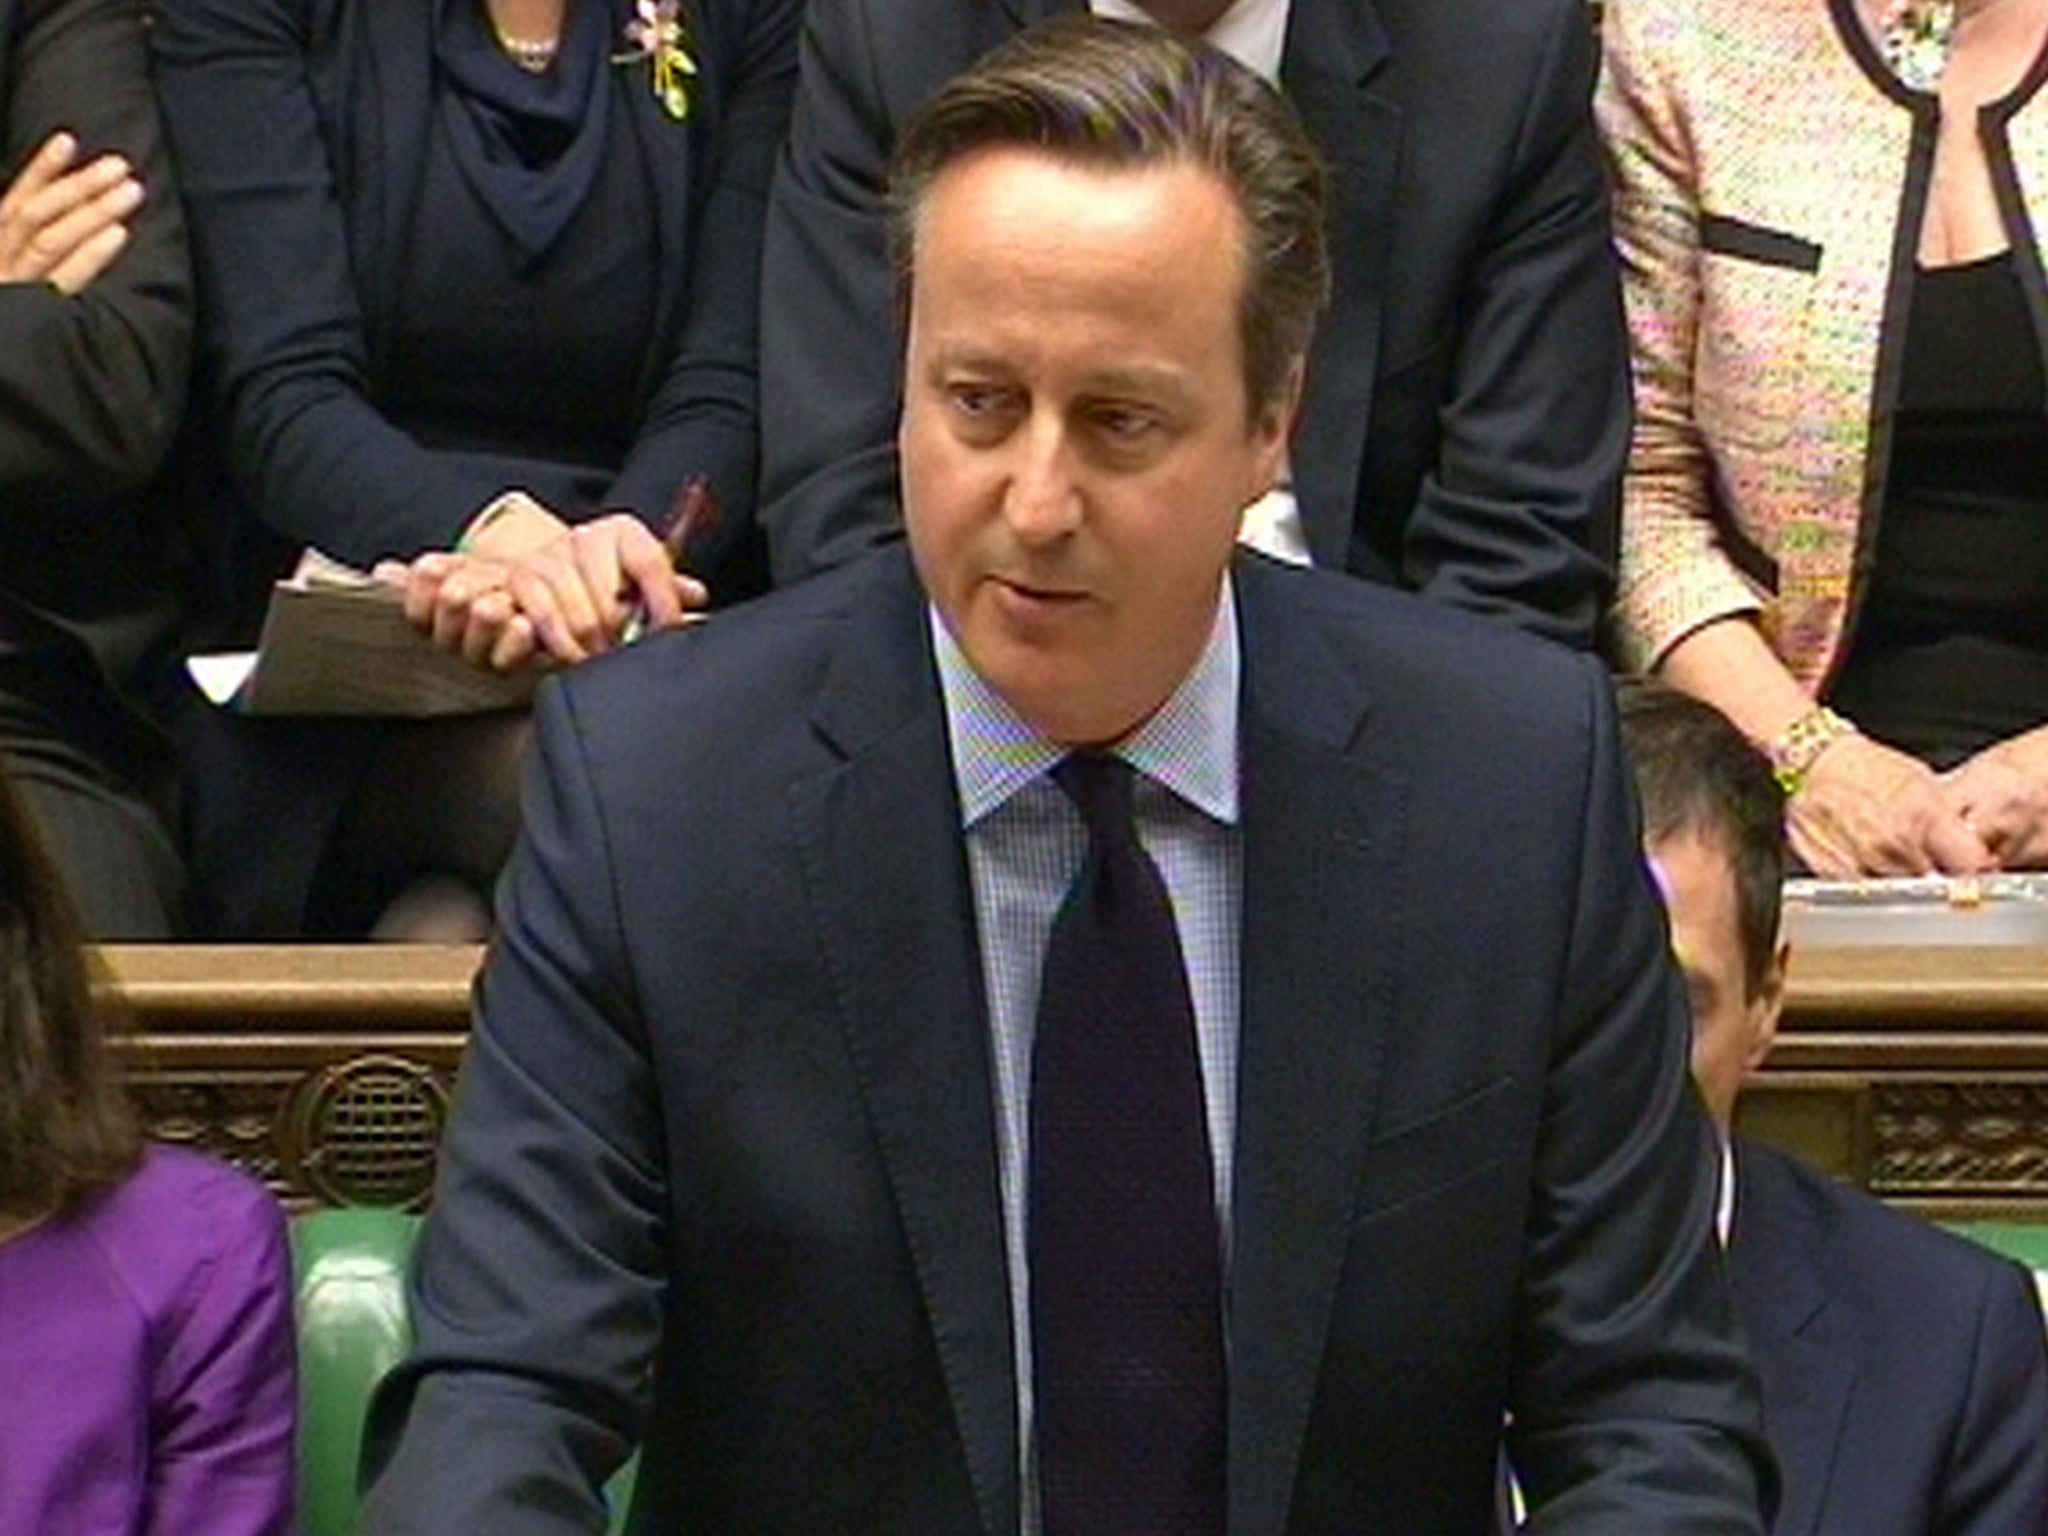 David Cameron speaks during Prime Minister's Questions in the House of Commons, London